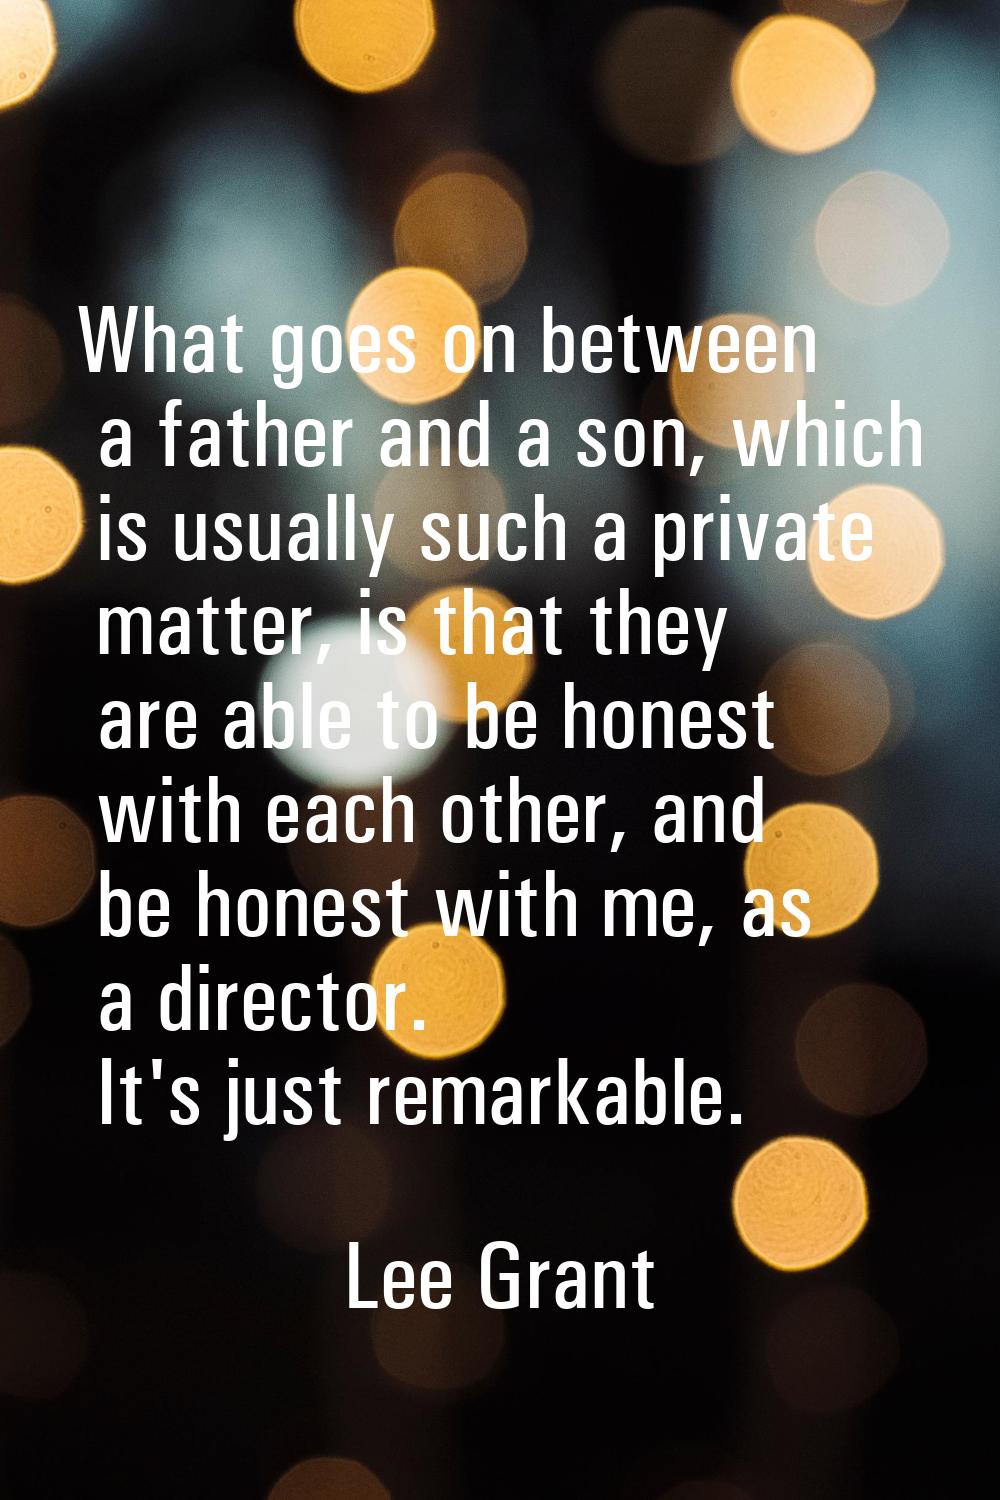 What goes on between a father and a son, which is usually such a private matter, is that they are a